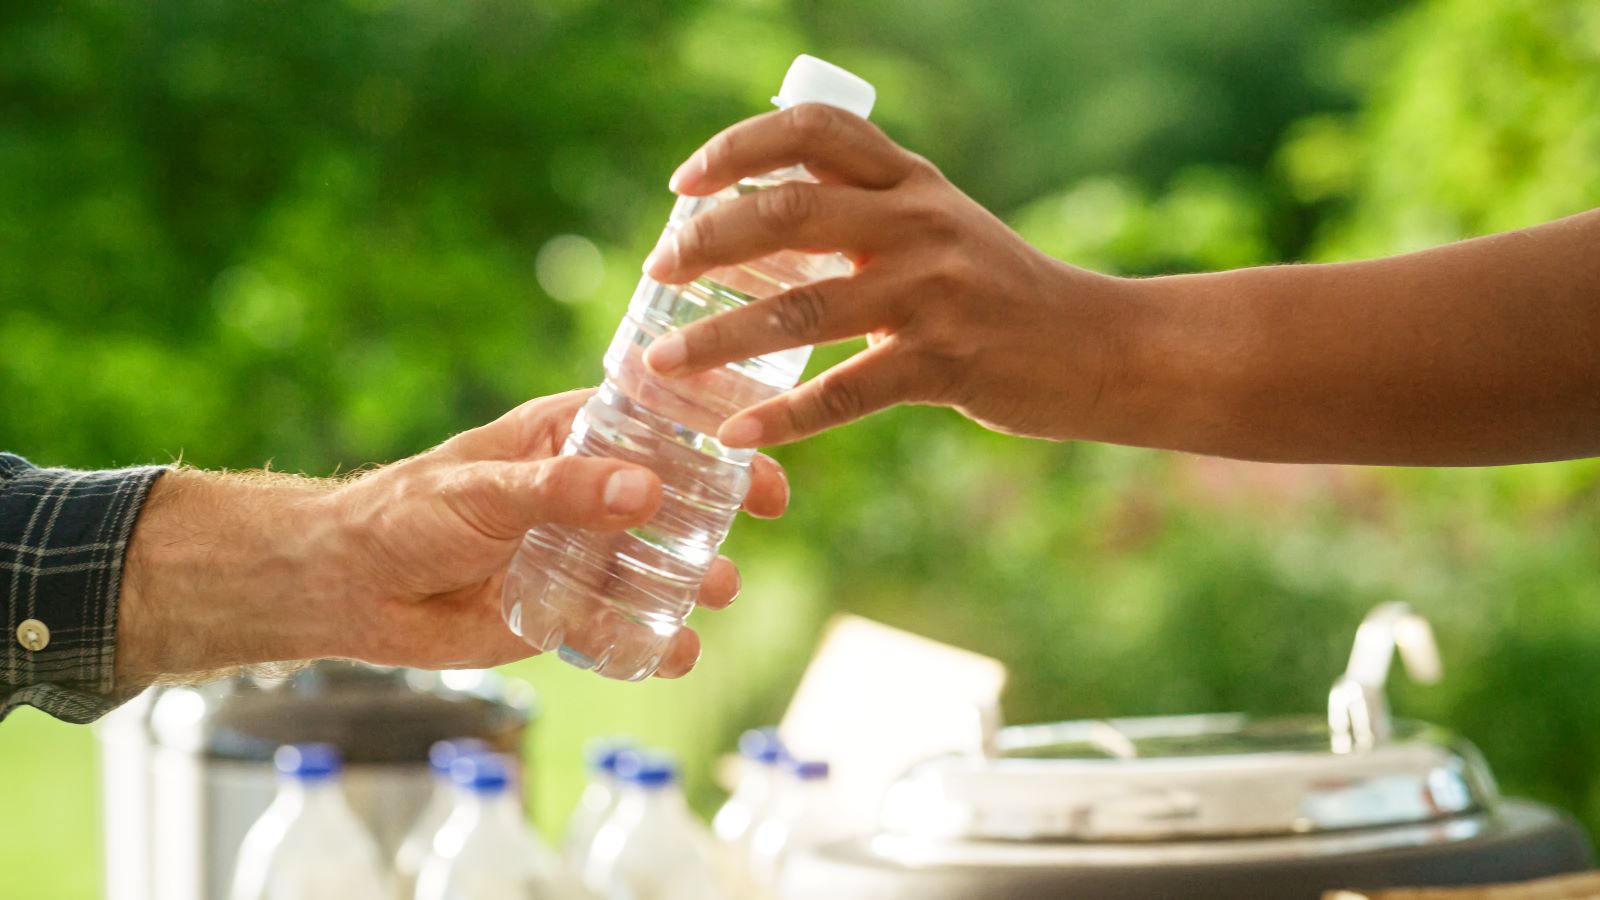 New research suggests that plastic water bottles contain servings of plastic microparticles. But do those particles put your health at risk?